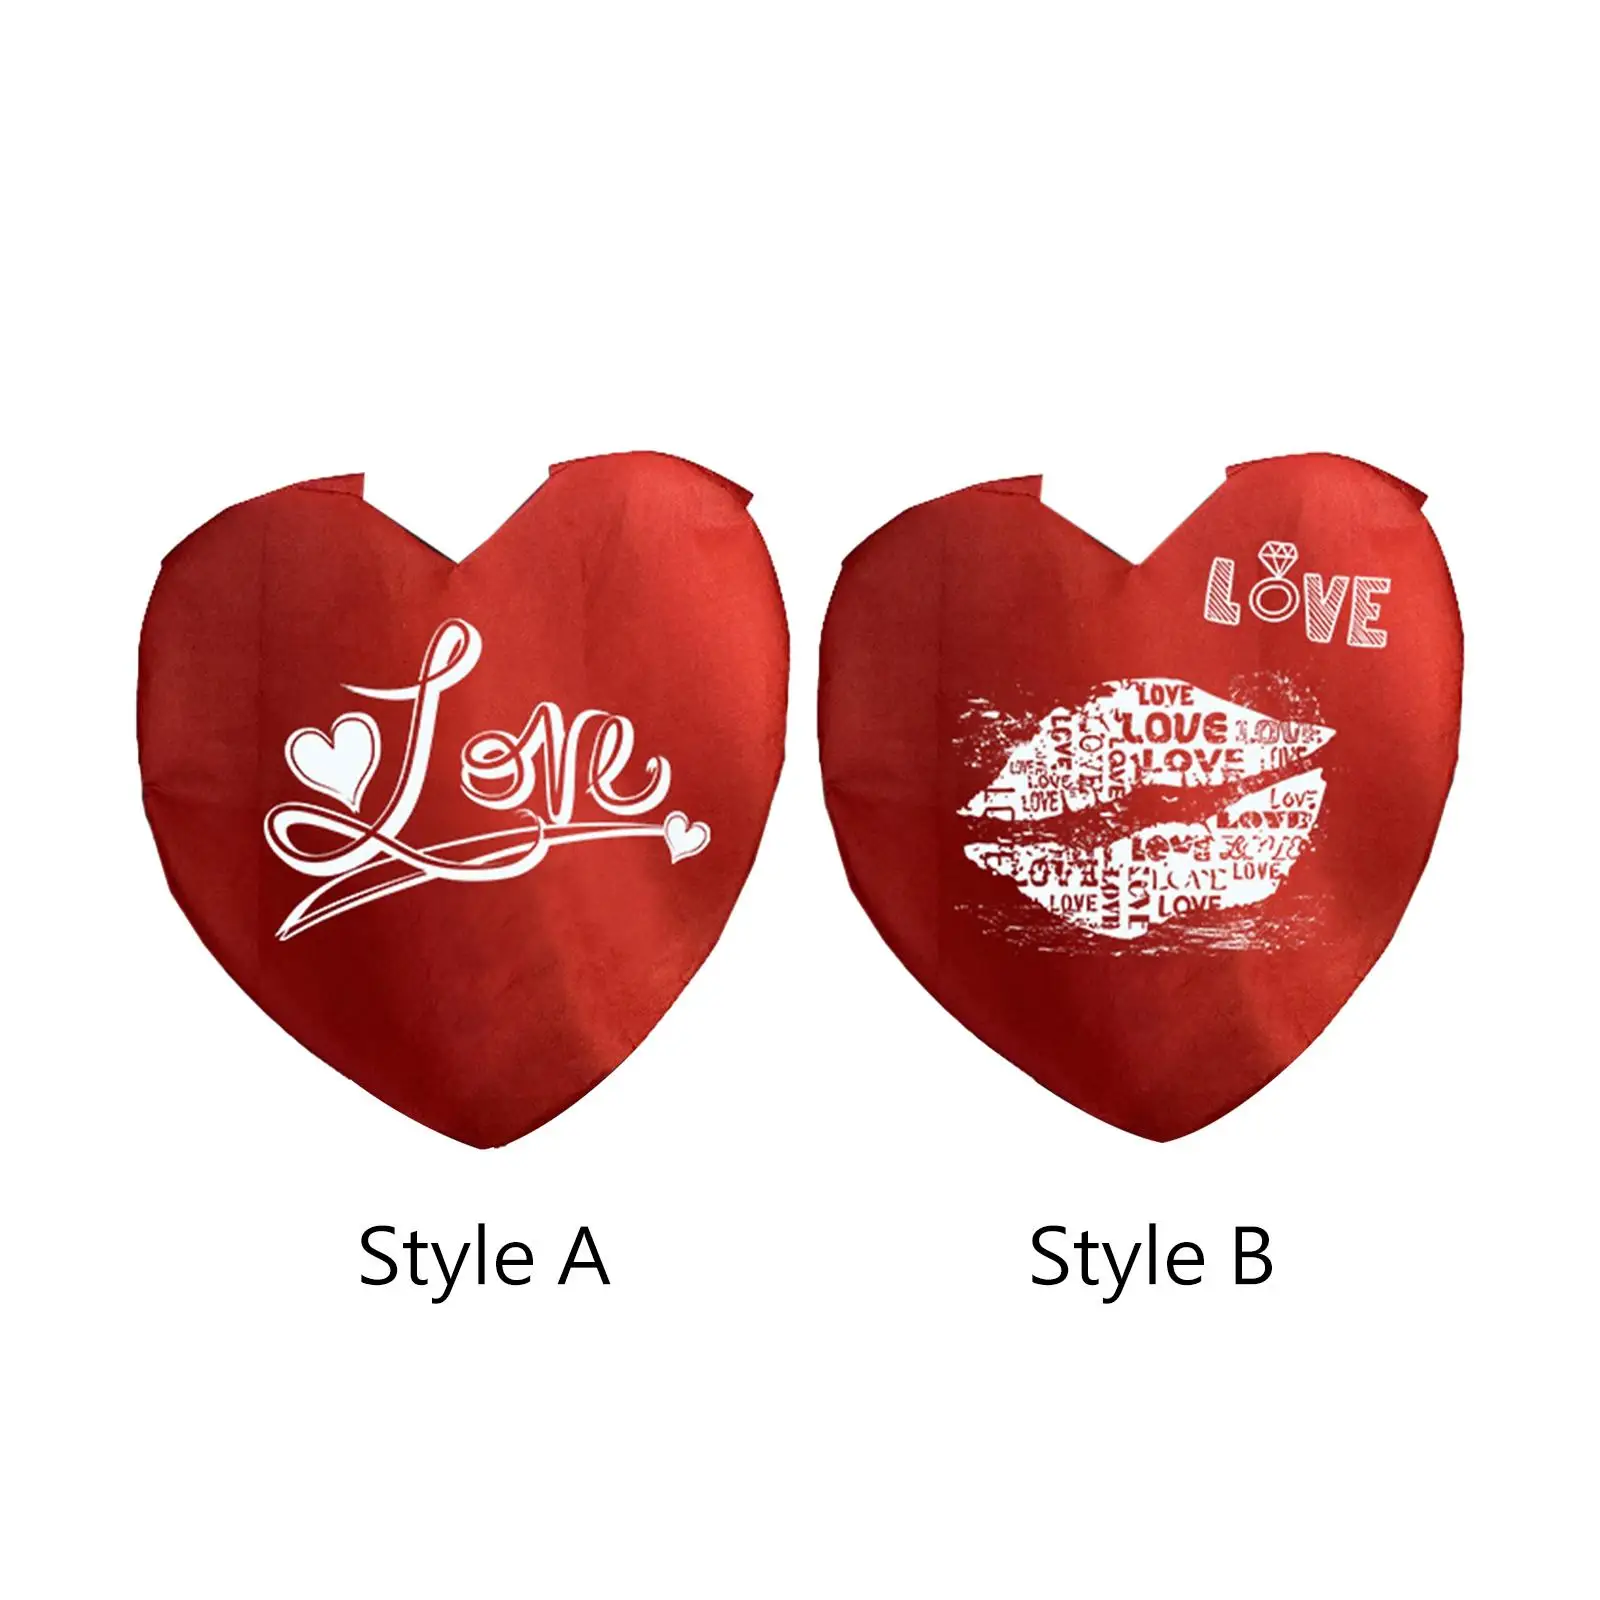 

Heart Costume for Valentines Day Red Love Clothing Letter Printed Tops for Cosplay Stage Performance Birthday Christmas Festival